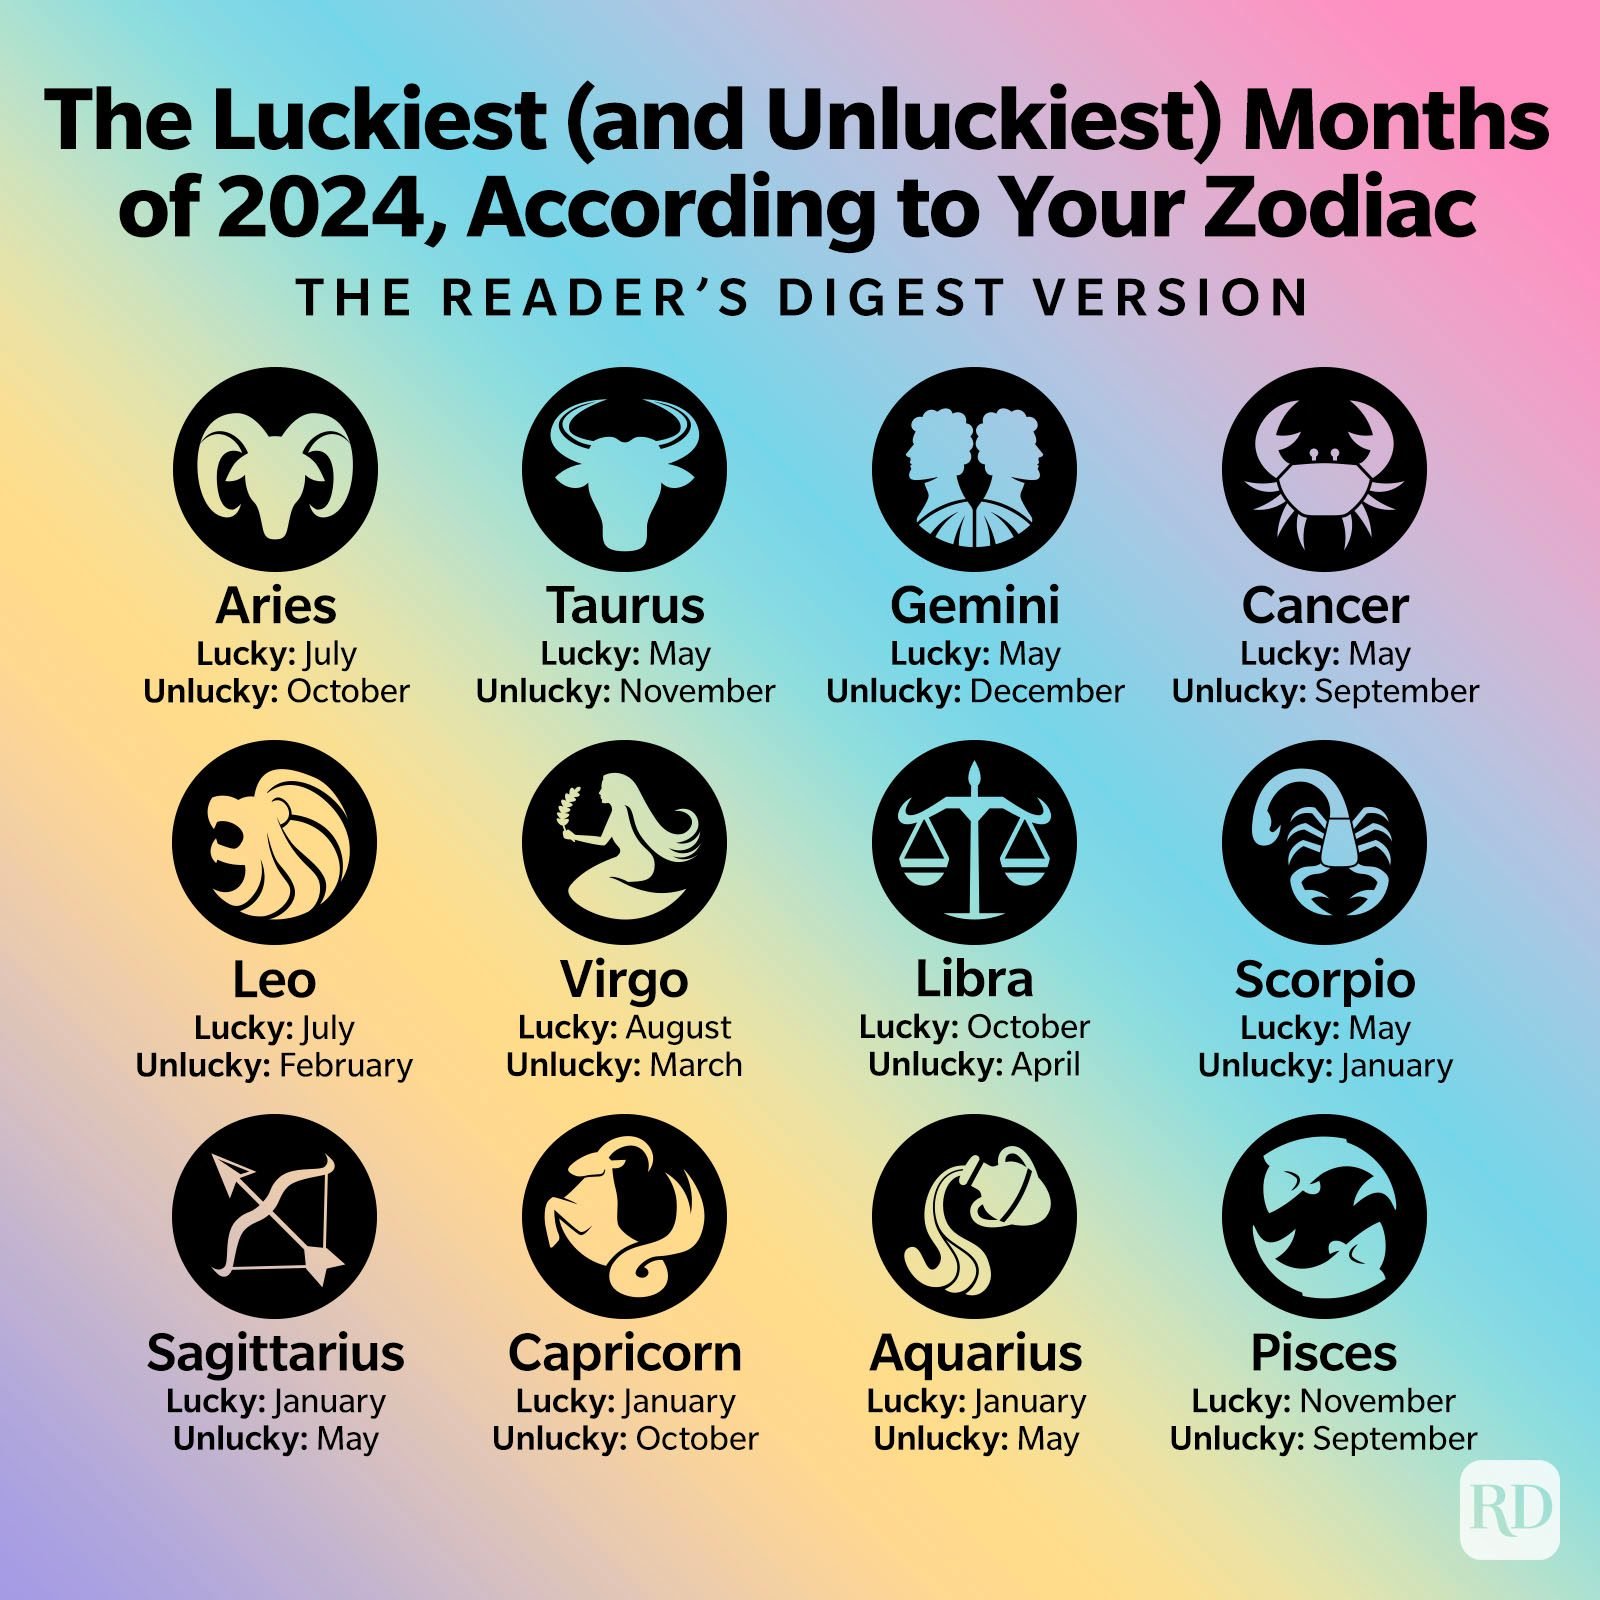 https://www.rd.com/wp-content/uploads/2023/12/The-Luckiest-and-Unluckiest-Months-of-2024-According-to-Your-Zodiac-Sign-Infographic-GettyImages.jpg?fit=700%2C700